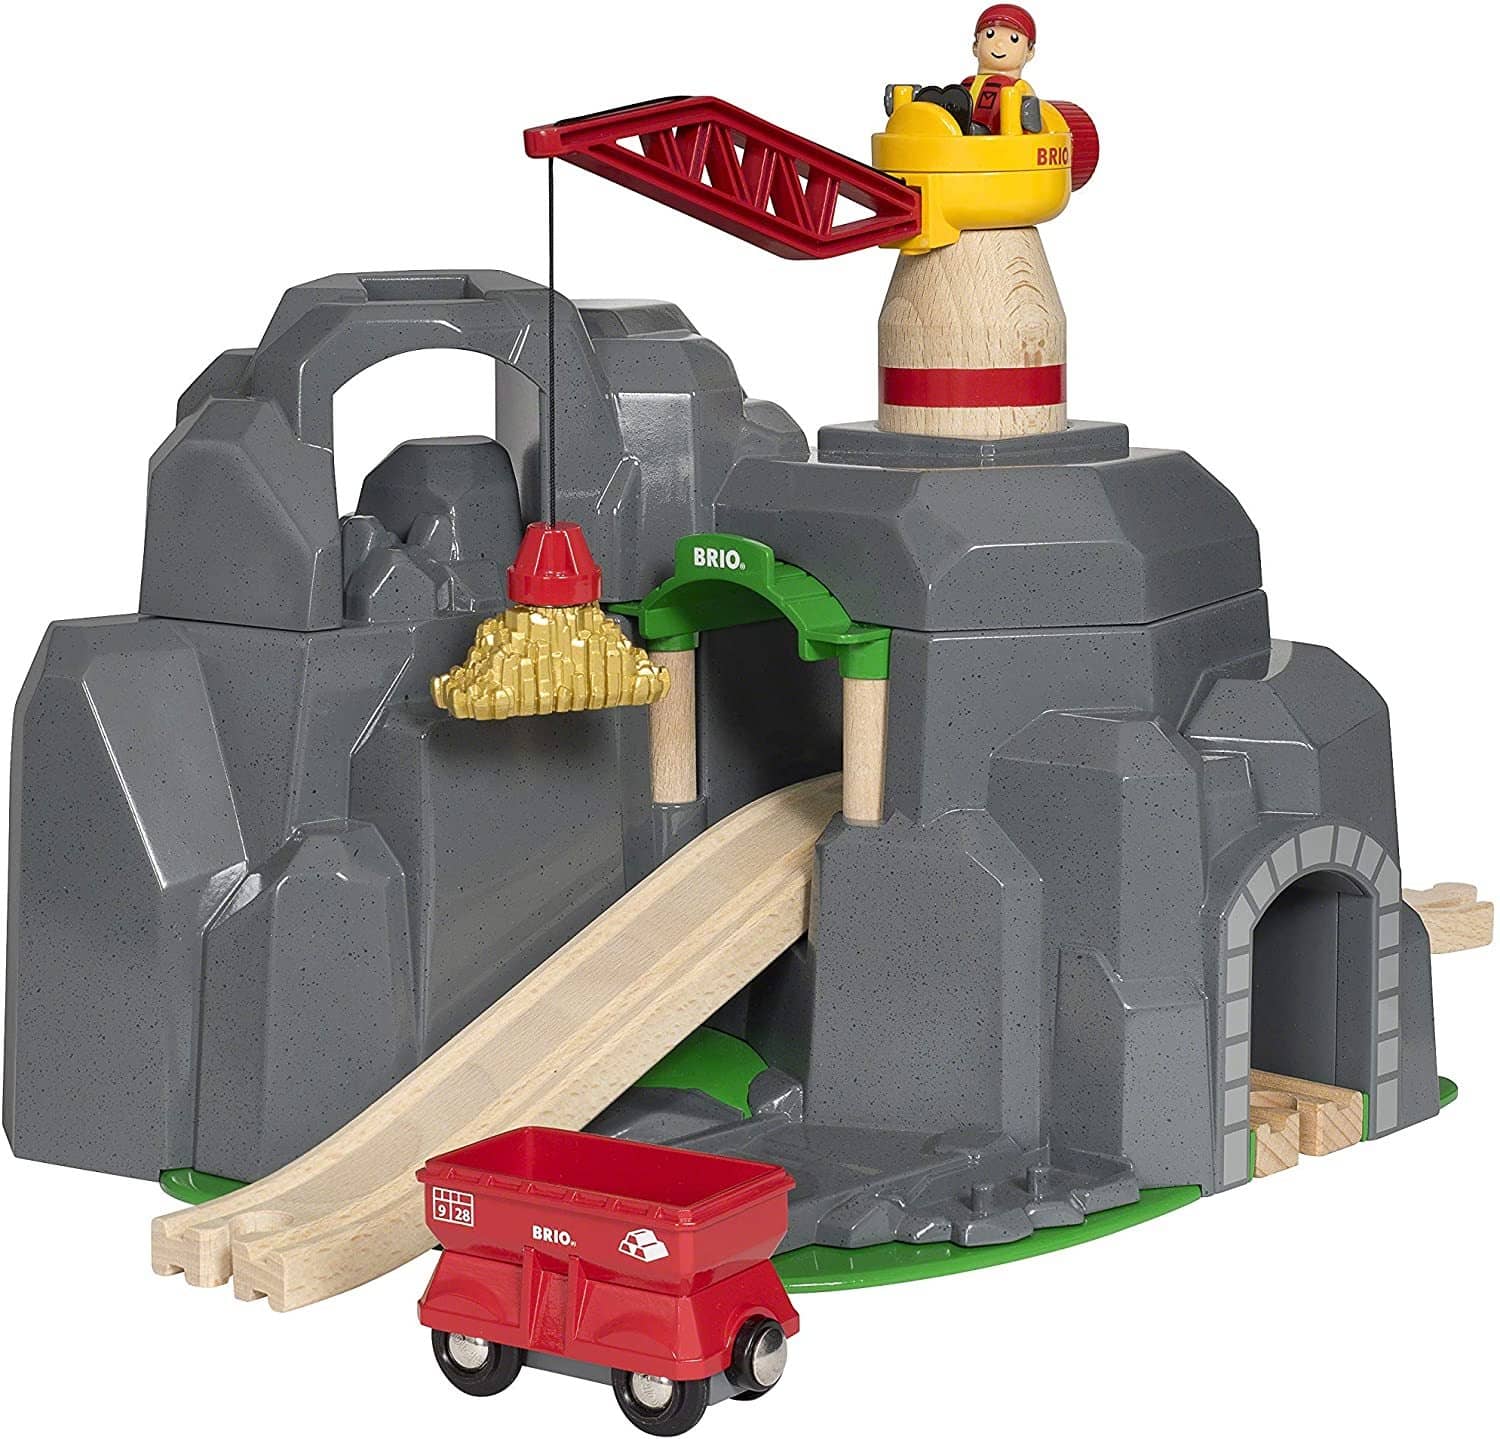 Brio World - 33889 Crane & Mountain Tunnel | 7 Piece Toy Train Accessory For Kids Ages 3 And Up-Kidding Around NYC